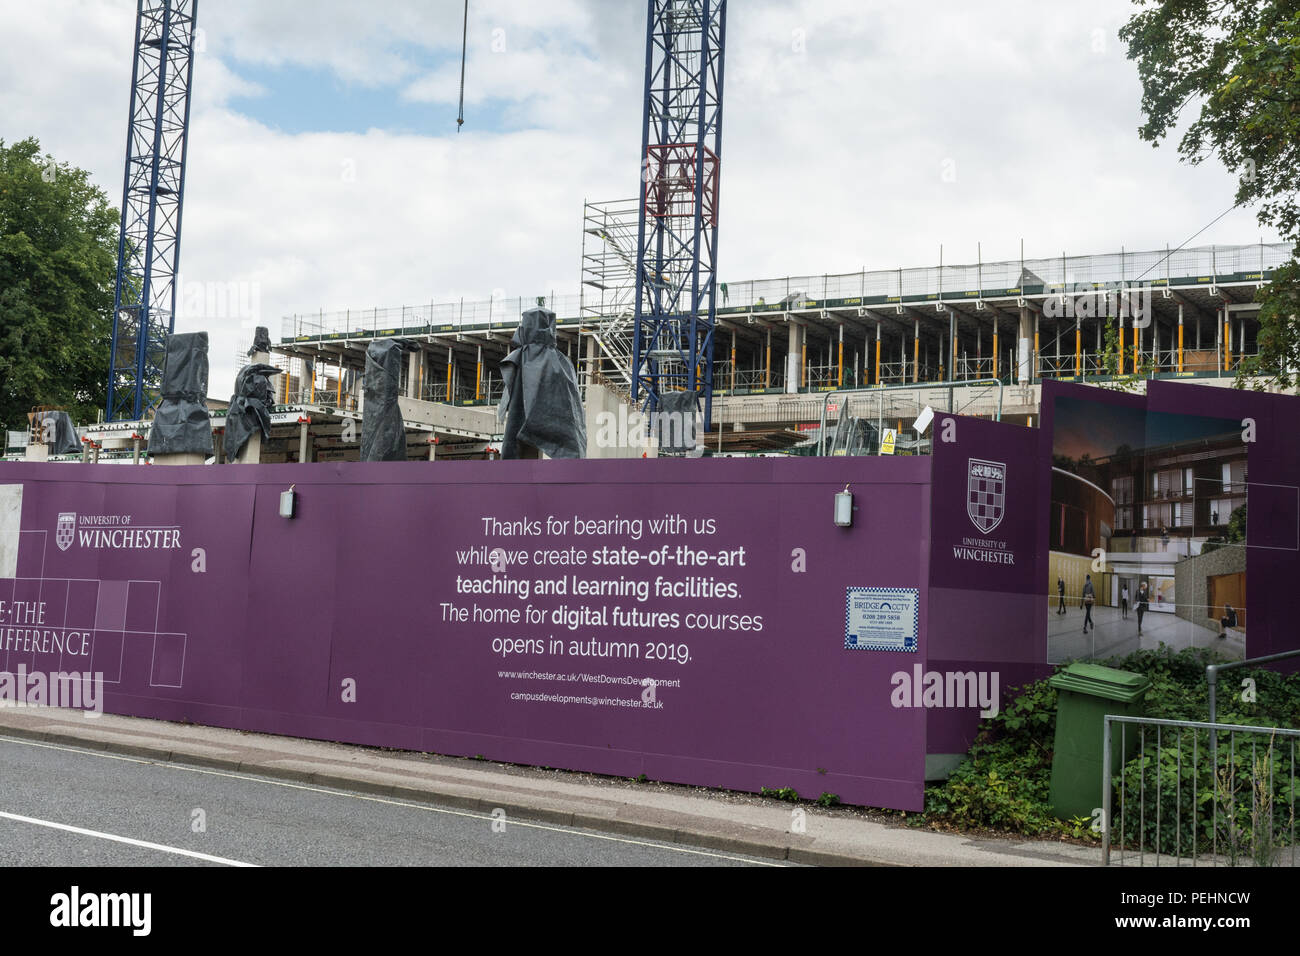 Construction work on the West Downs campus of the University of Winchester in August 2018 in Romsey Road, Hampshire, UK. Stock Photo